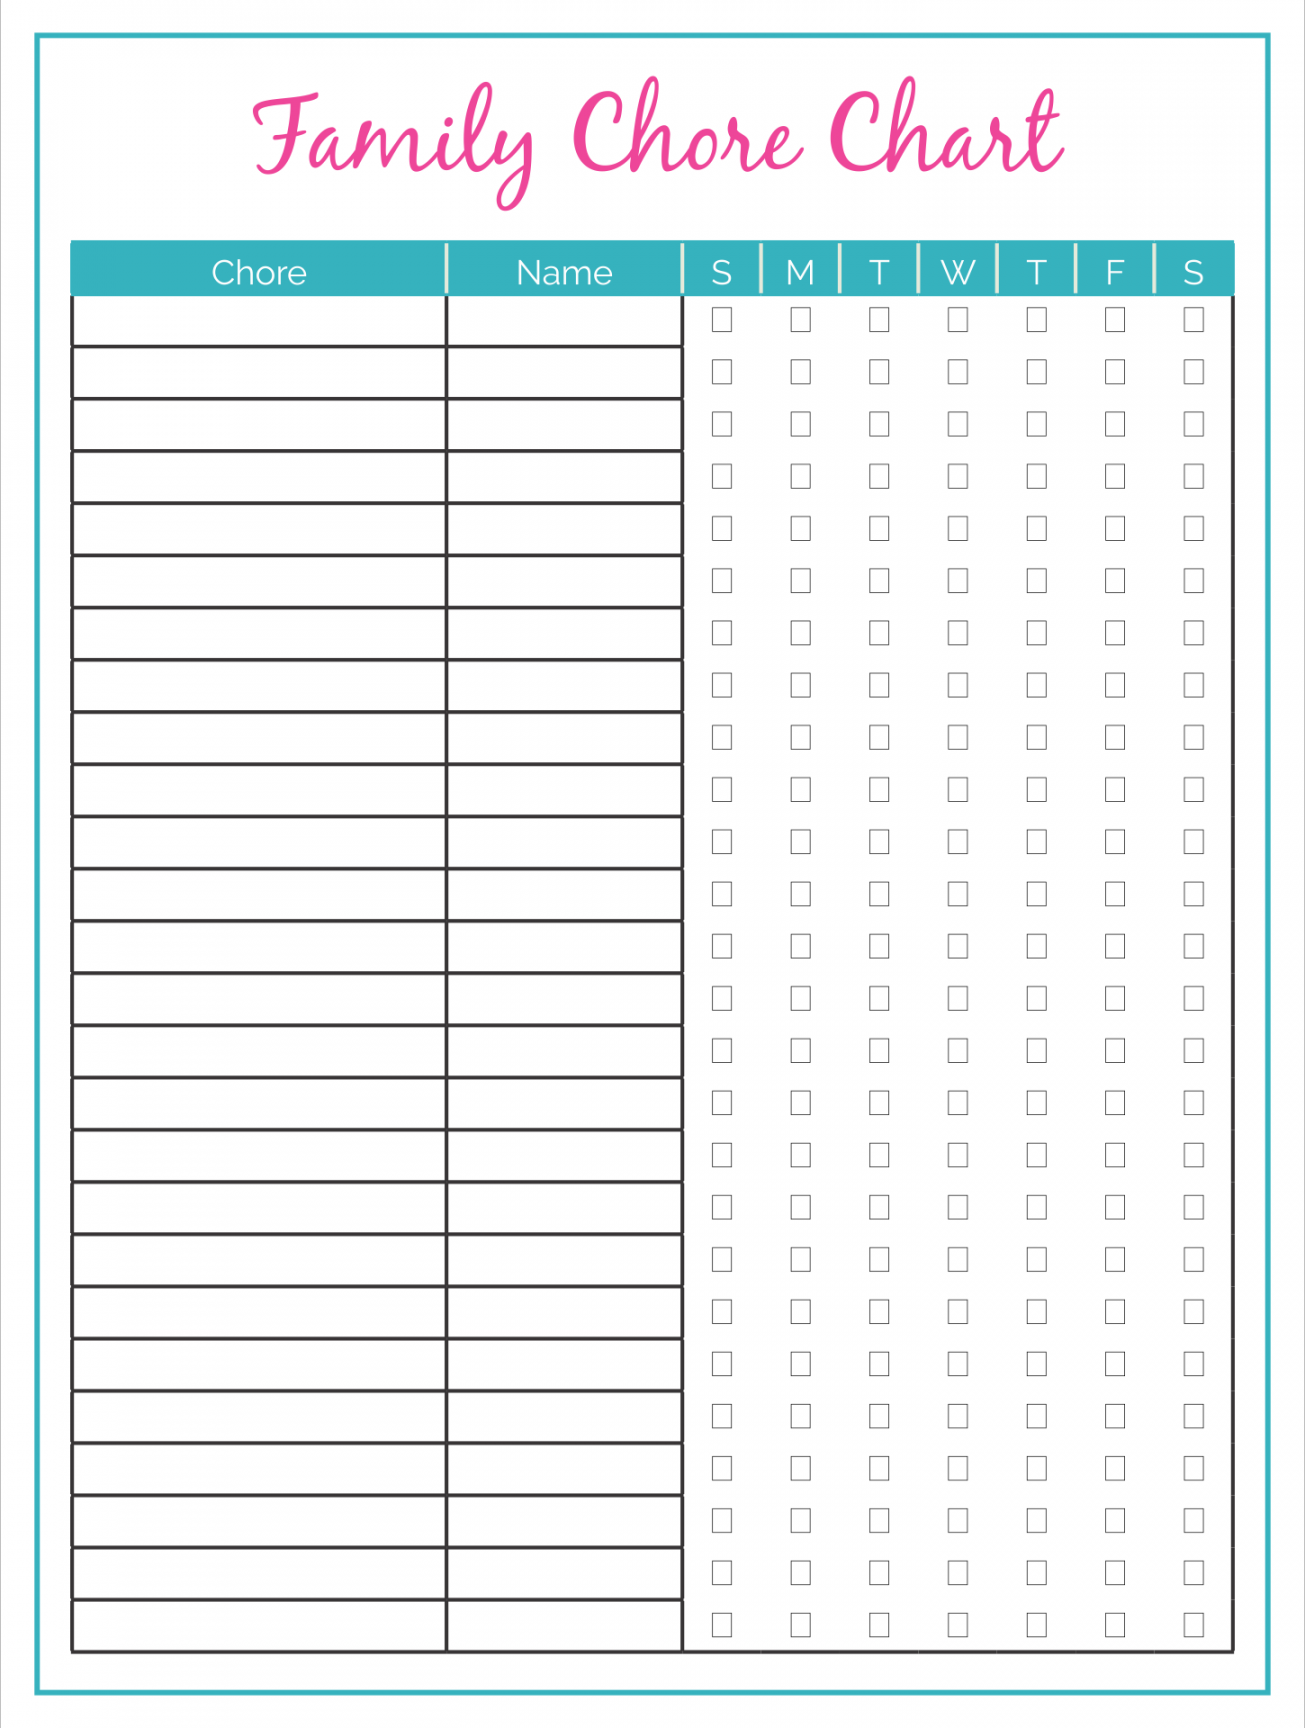 Best Free Printable Family Chore Charts - printablee - Family Chore Chart Printable Free